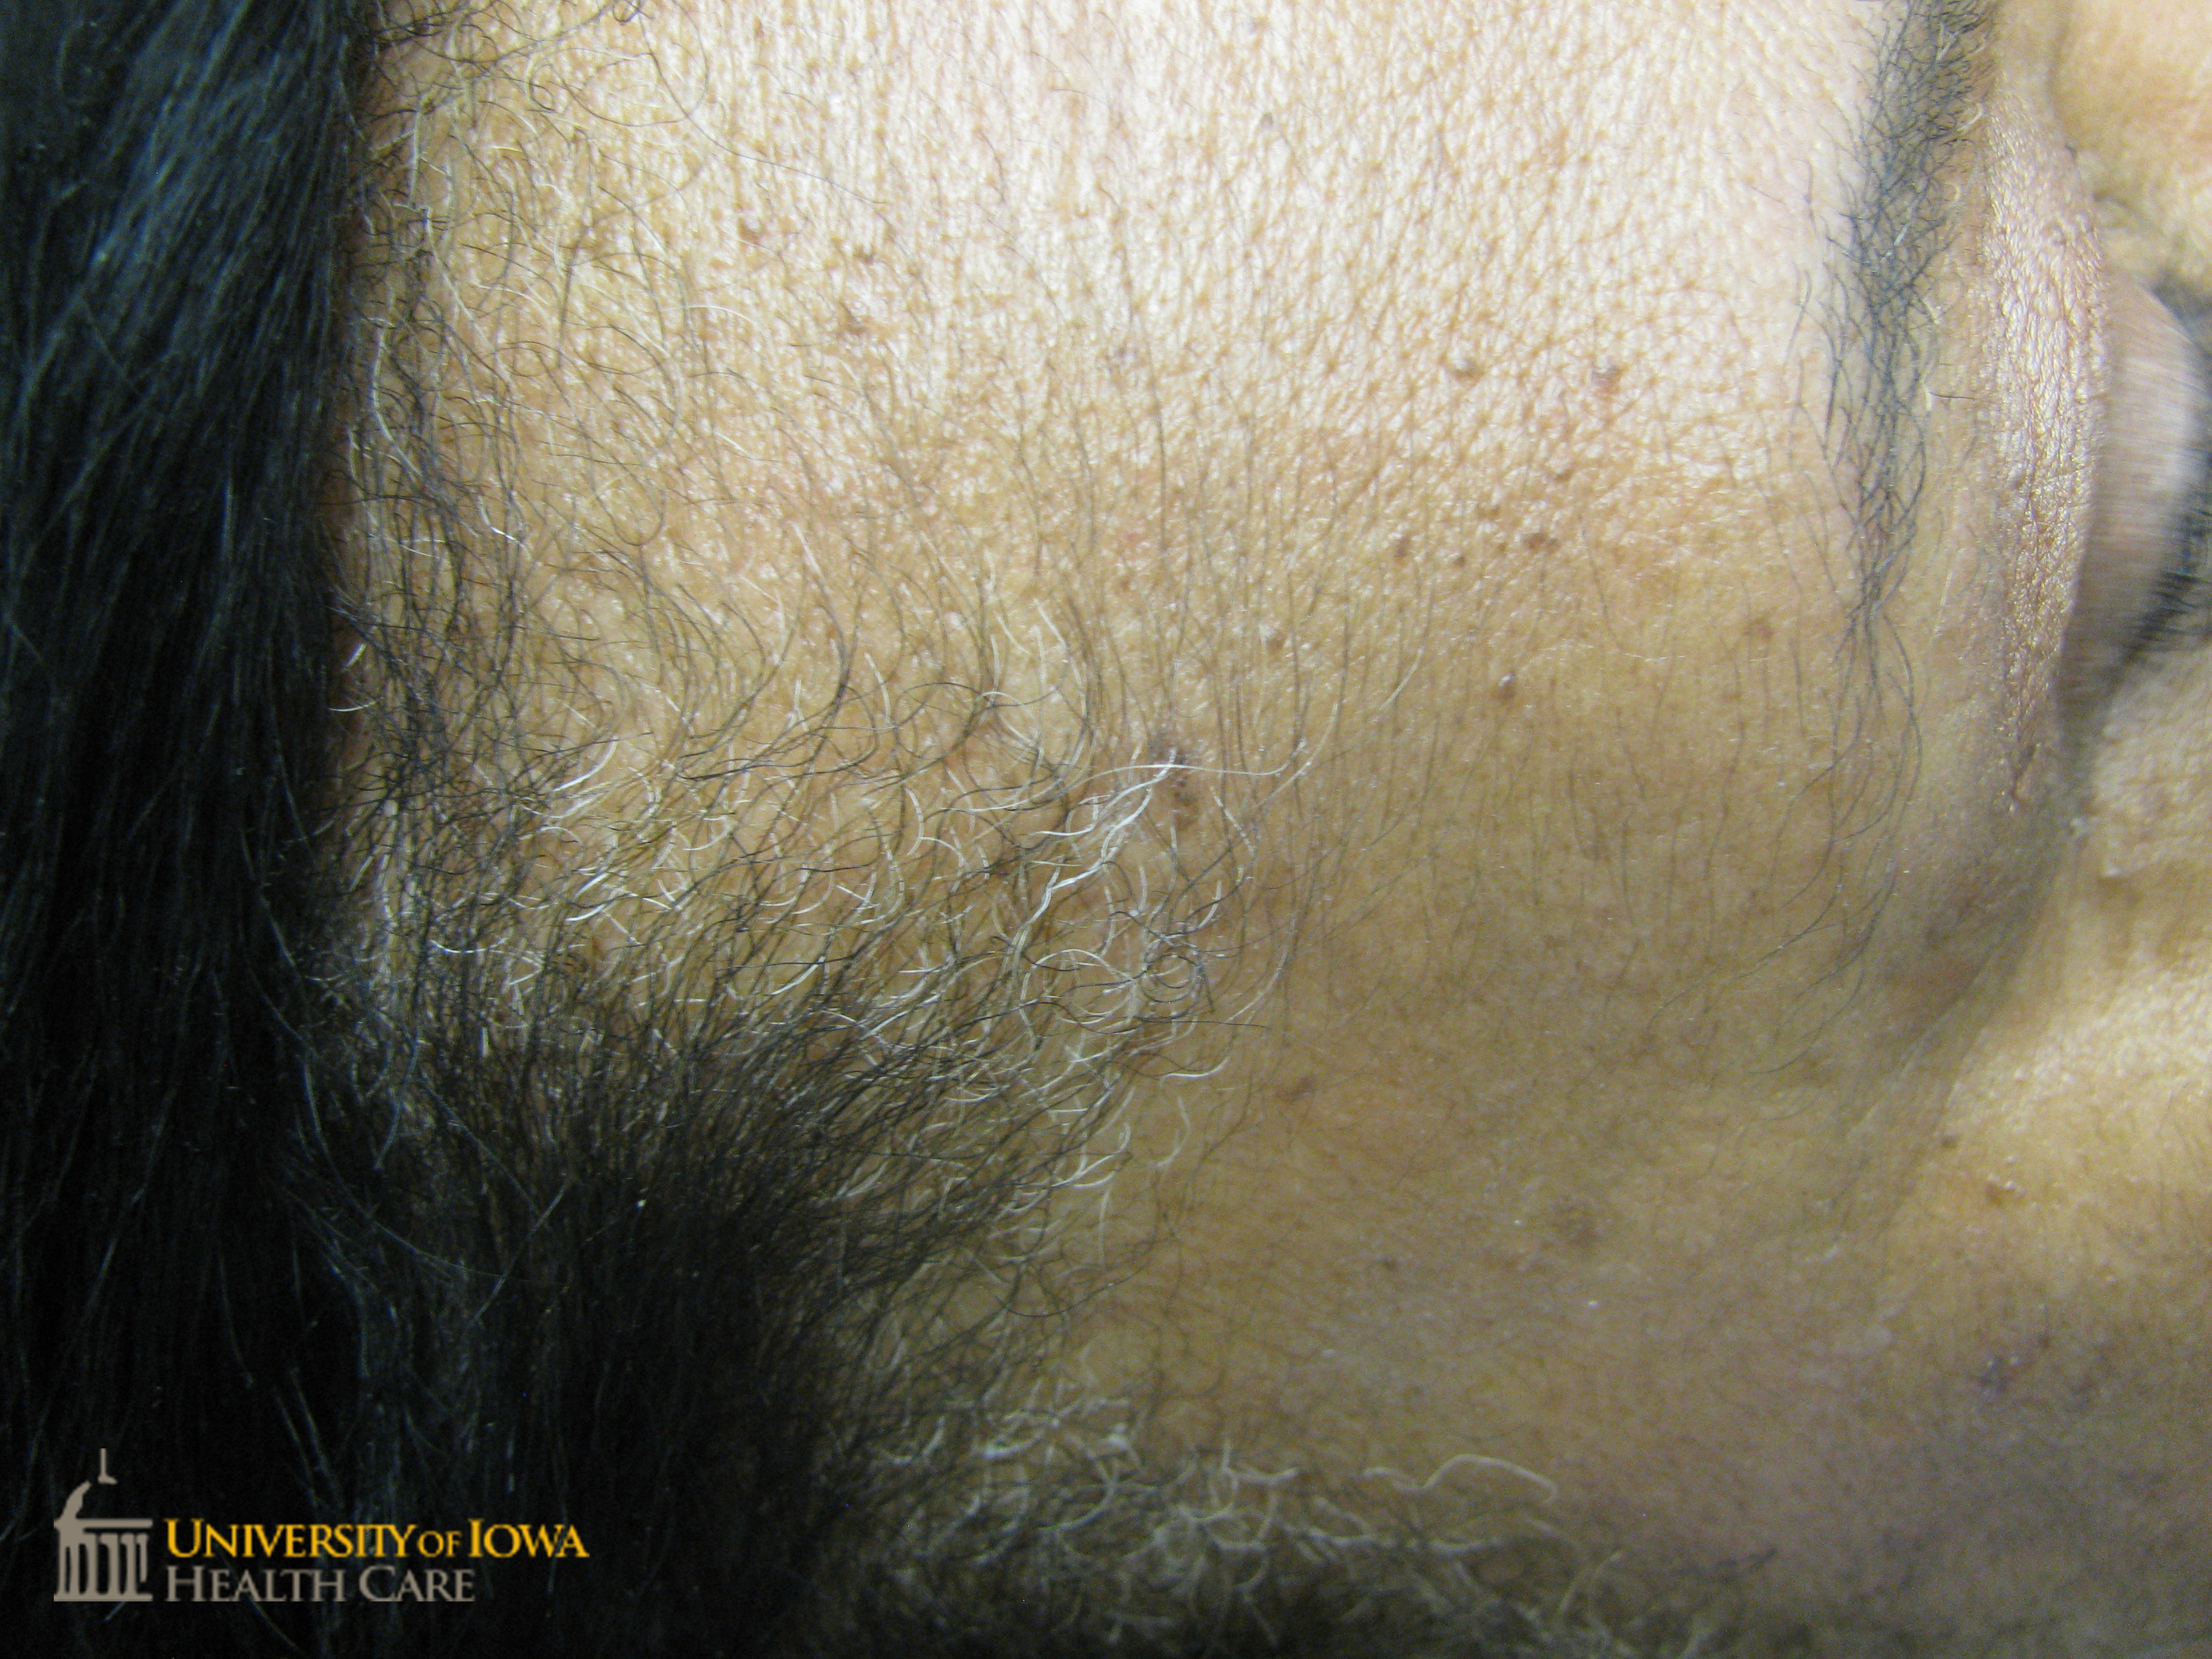 Multiple stuck-on brown papules on the forehead. (click images for higher resolution).